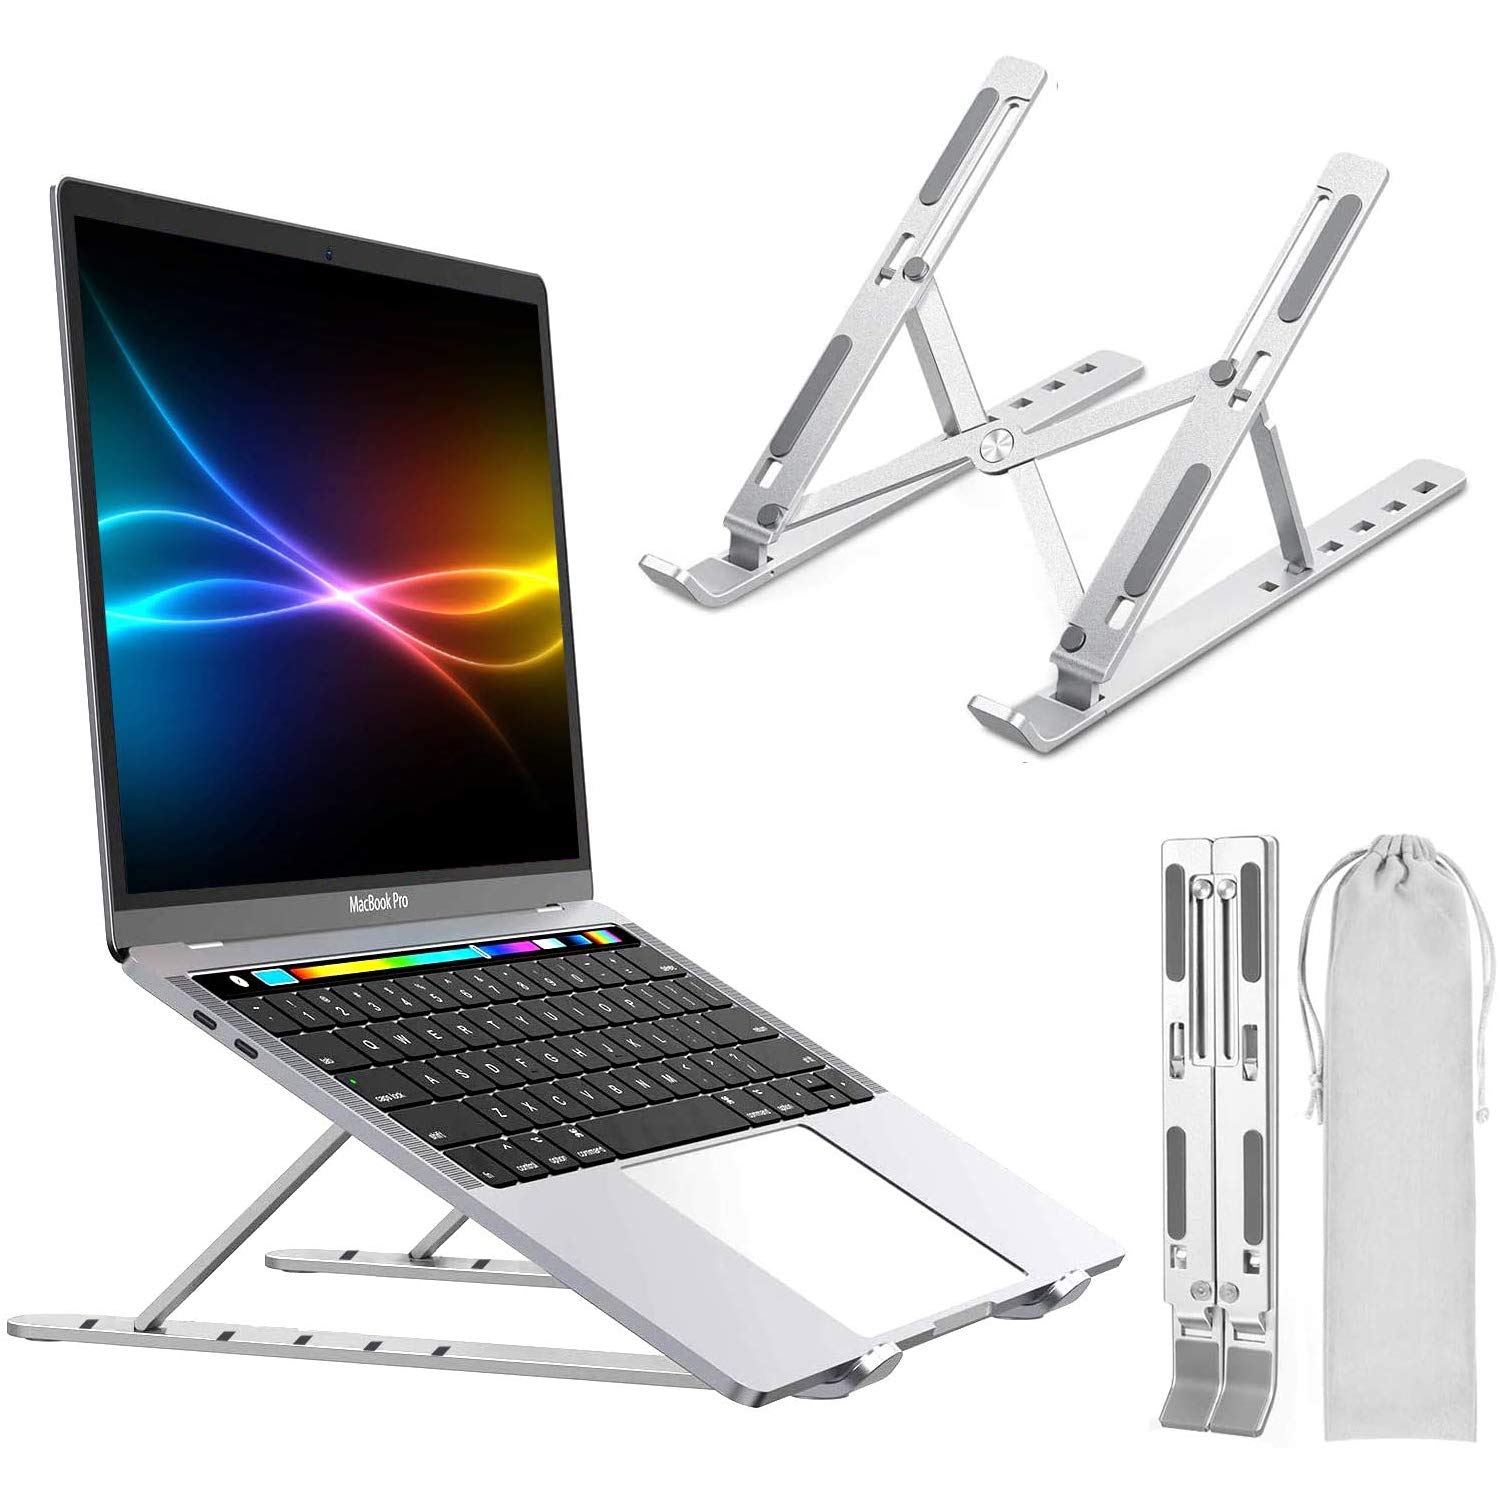 CLAW Portable Laptop Stand with Carry Pouch, 6 Adjustable